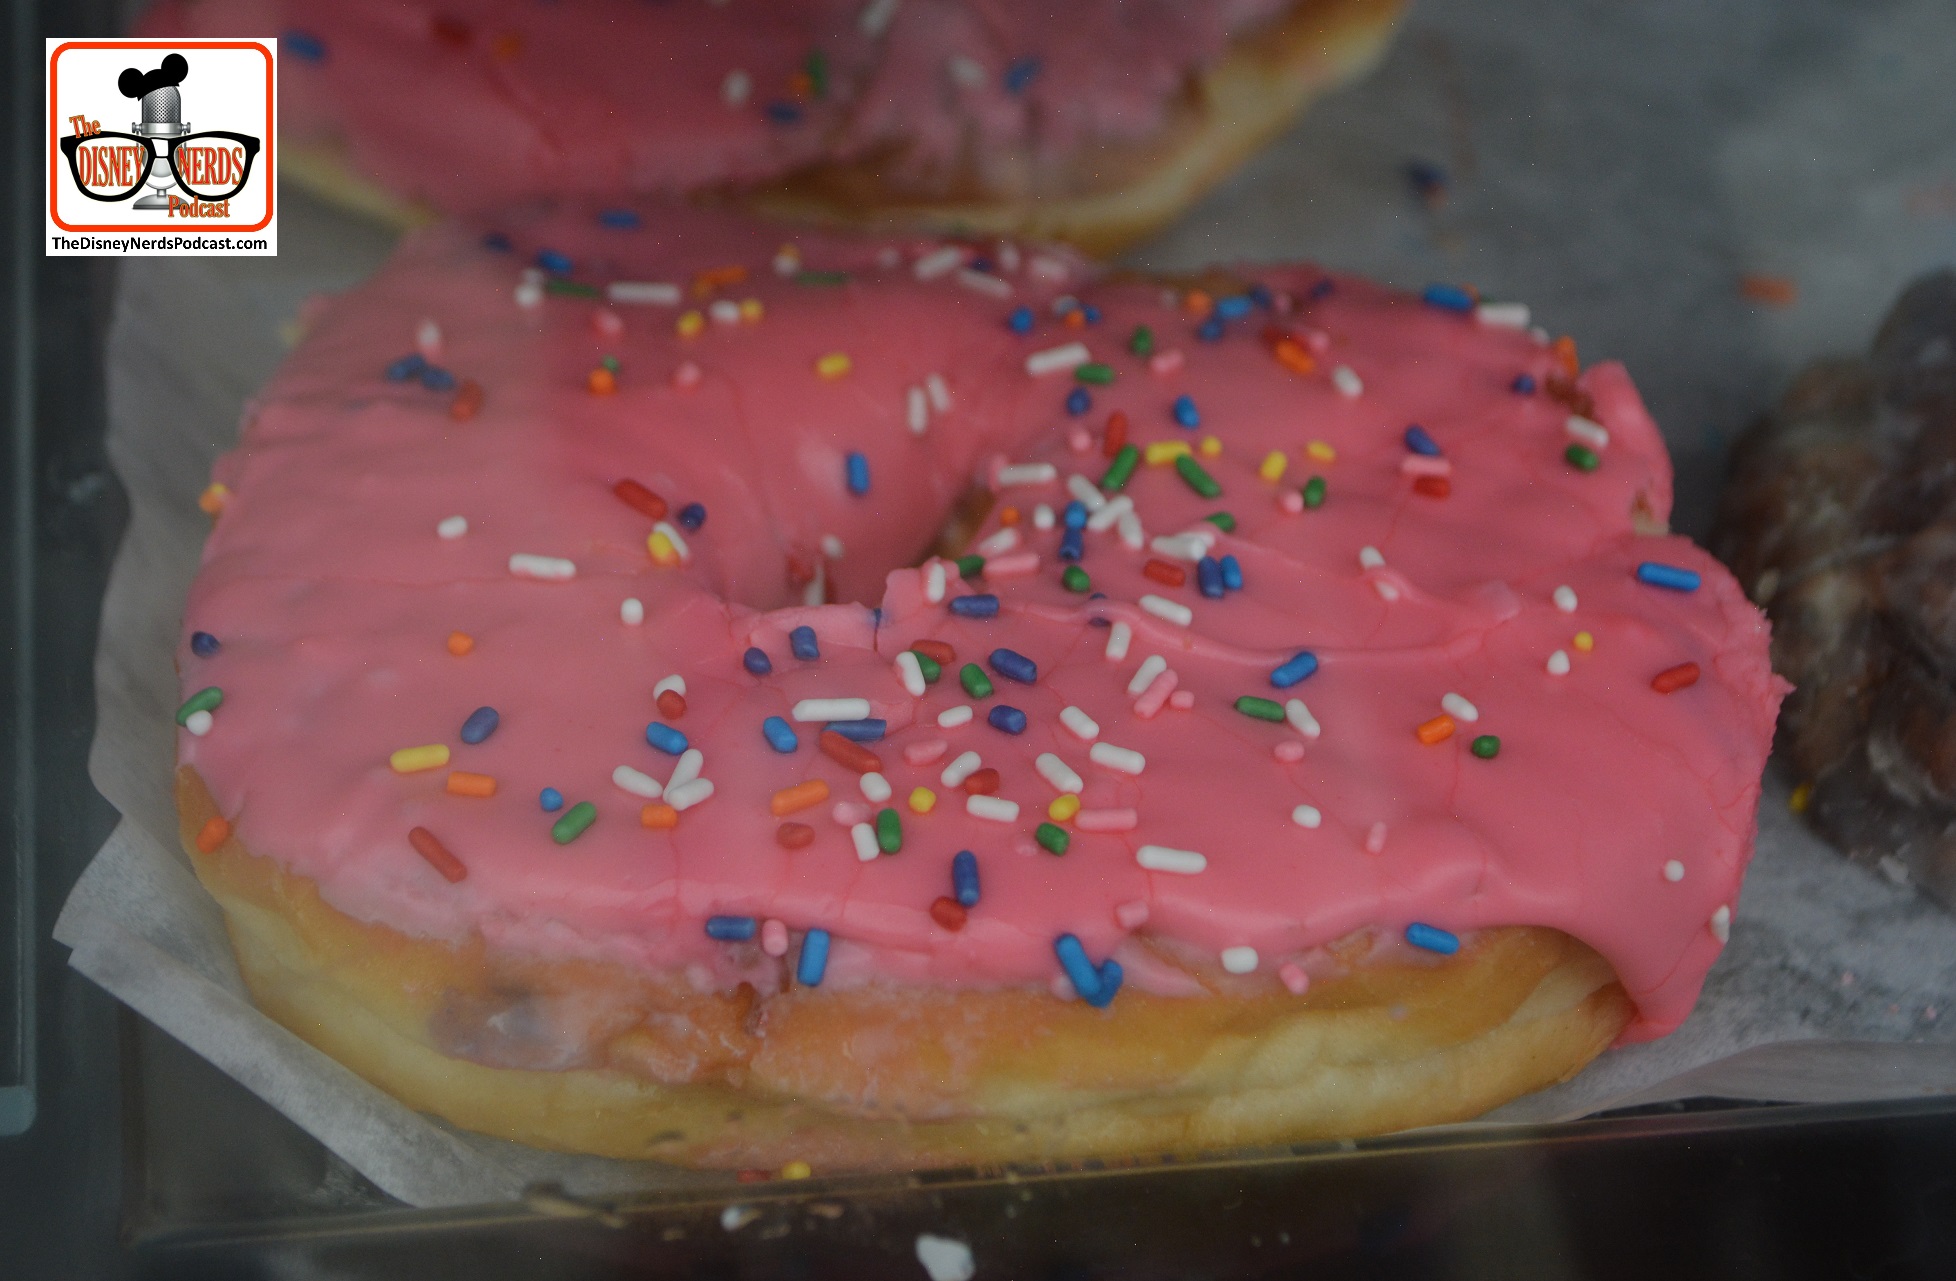 Is that a "Simpsons" doughnut? sure looks like the same think you can find in Springfield... this one is located at the coffee cart out side of Animal Kingdom